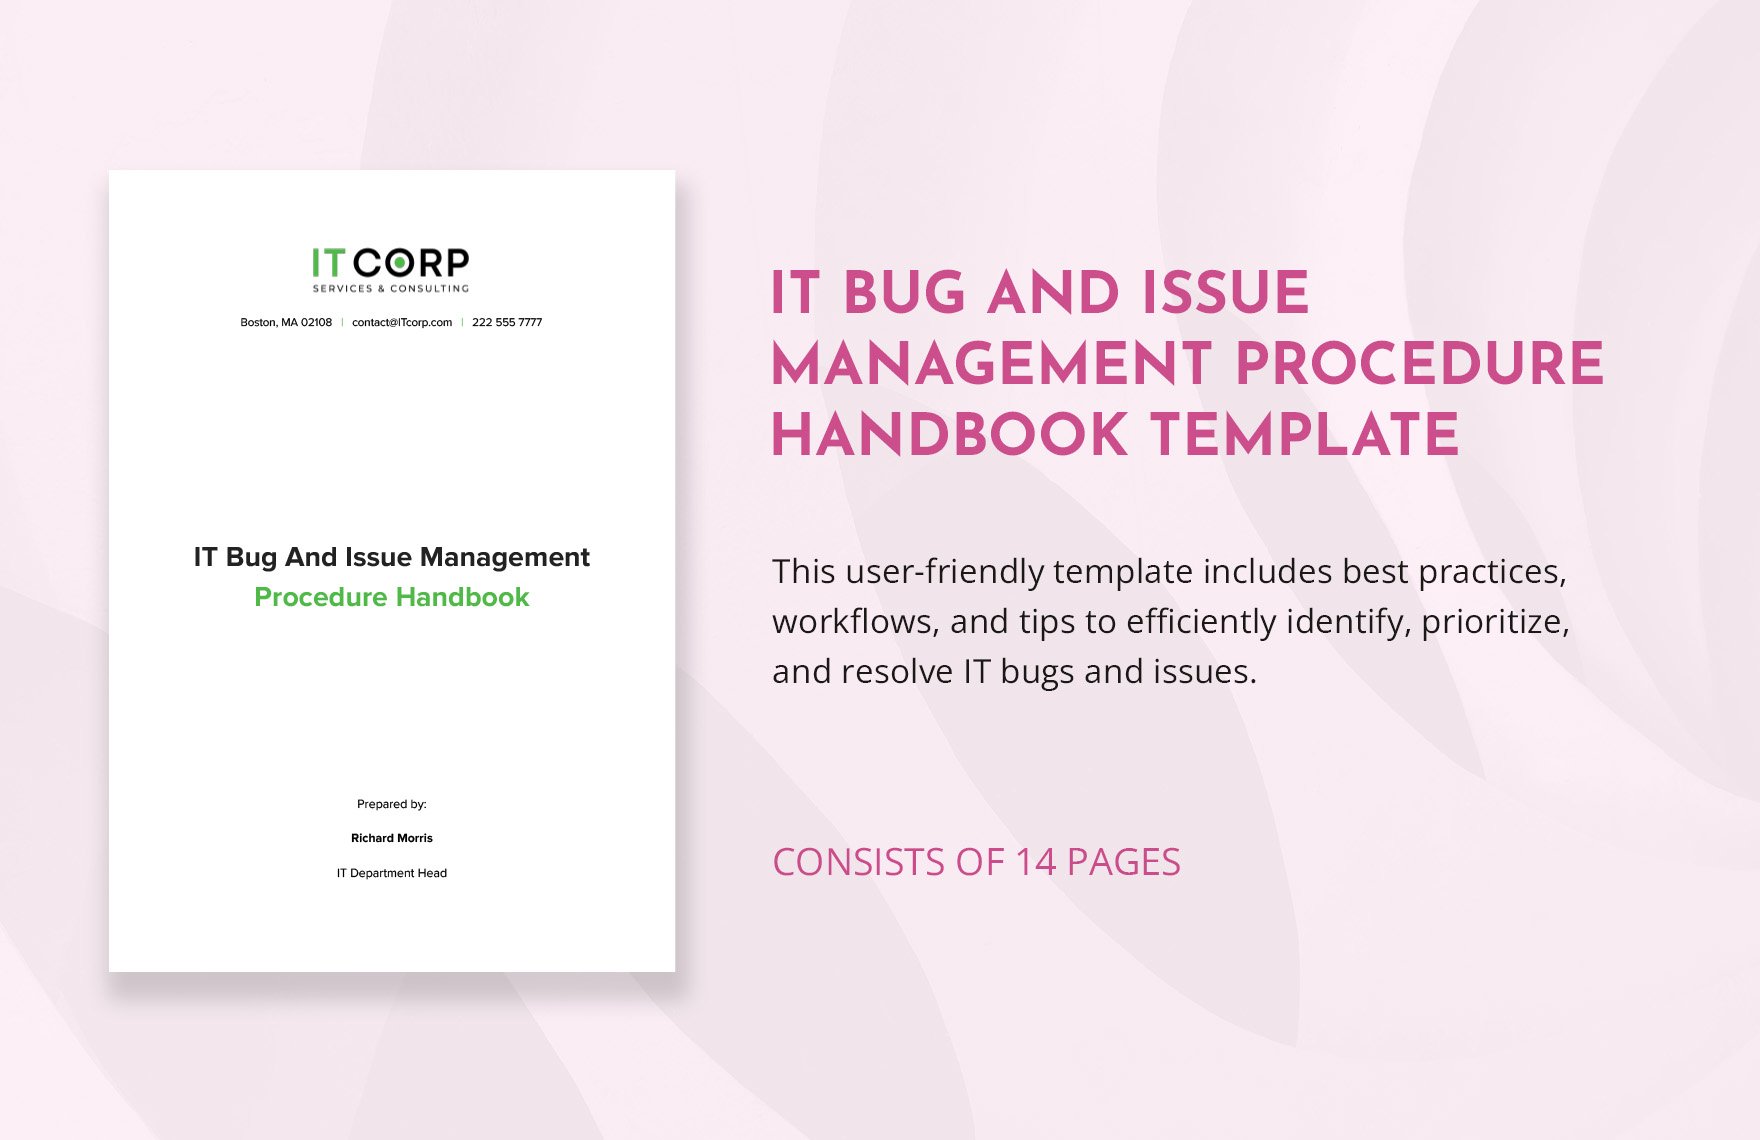 IT Bug and Issue Management Procedure Handbook Template